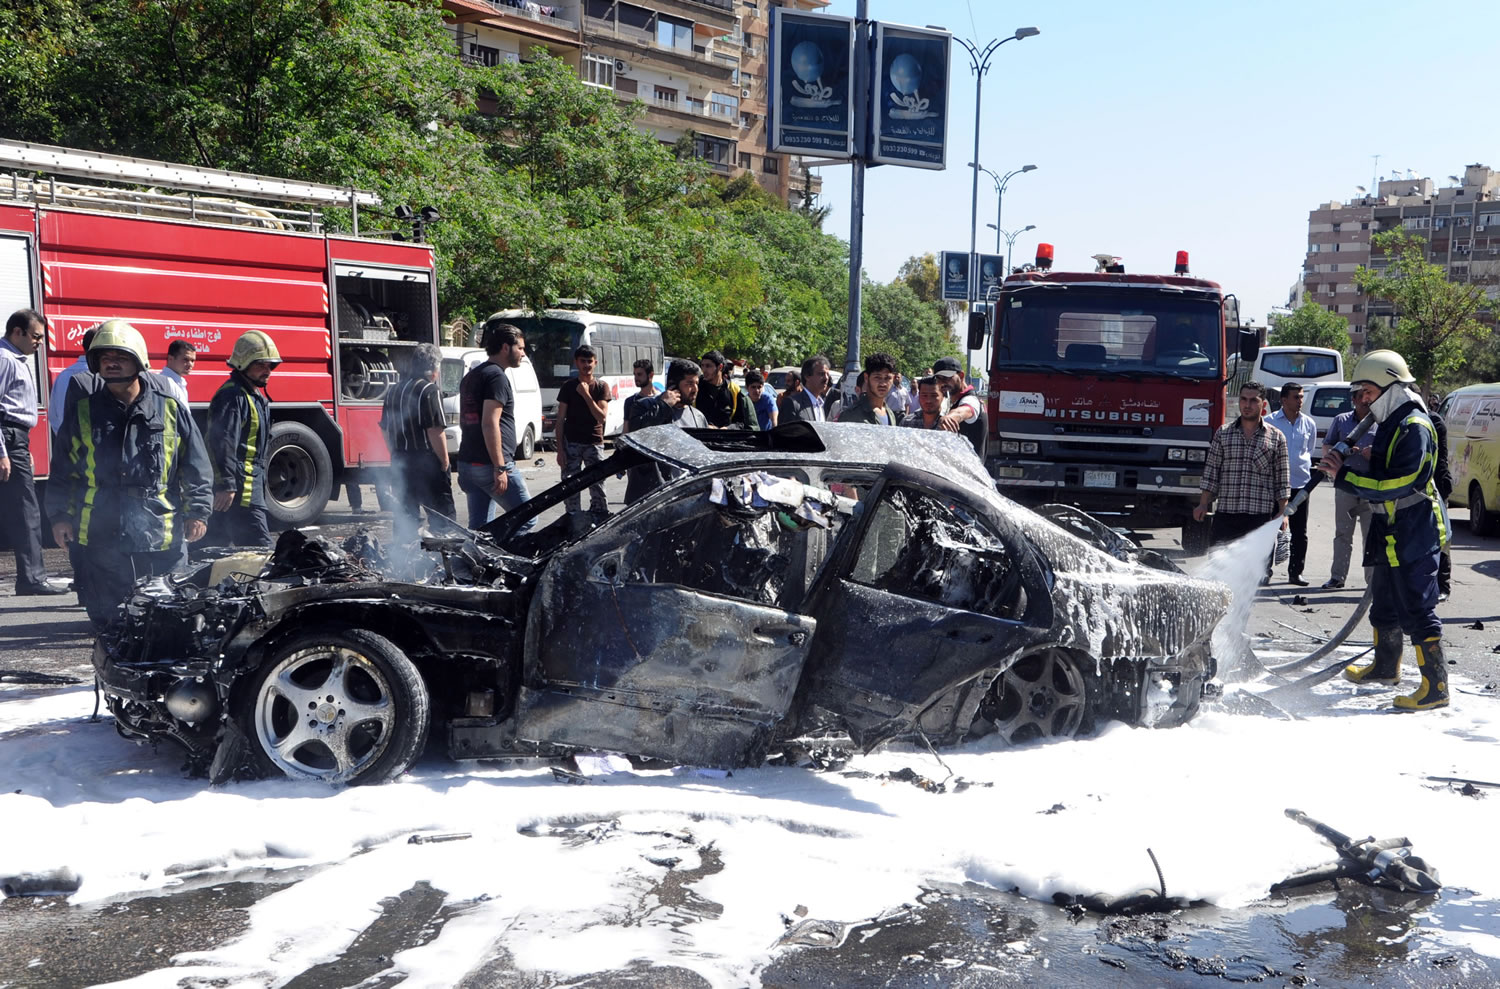 Syrian fire fighters extinguish burning cars after a car bomb exploded in the capital's western neighborhood of Mazzeh, in Damascus, Syria, on Monday.